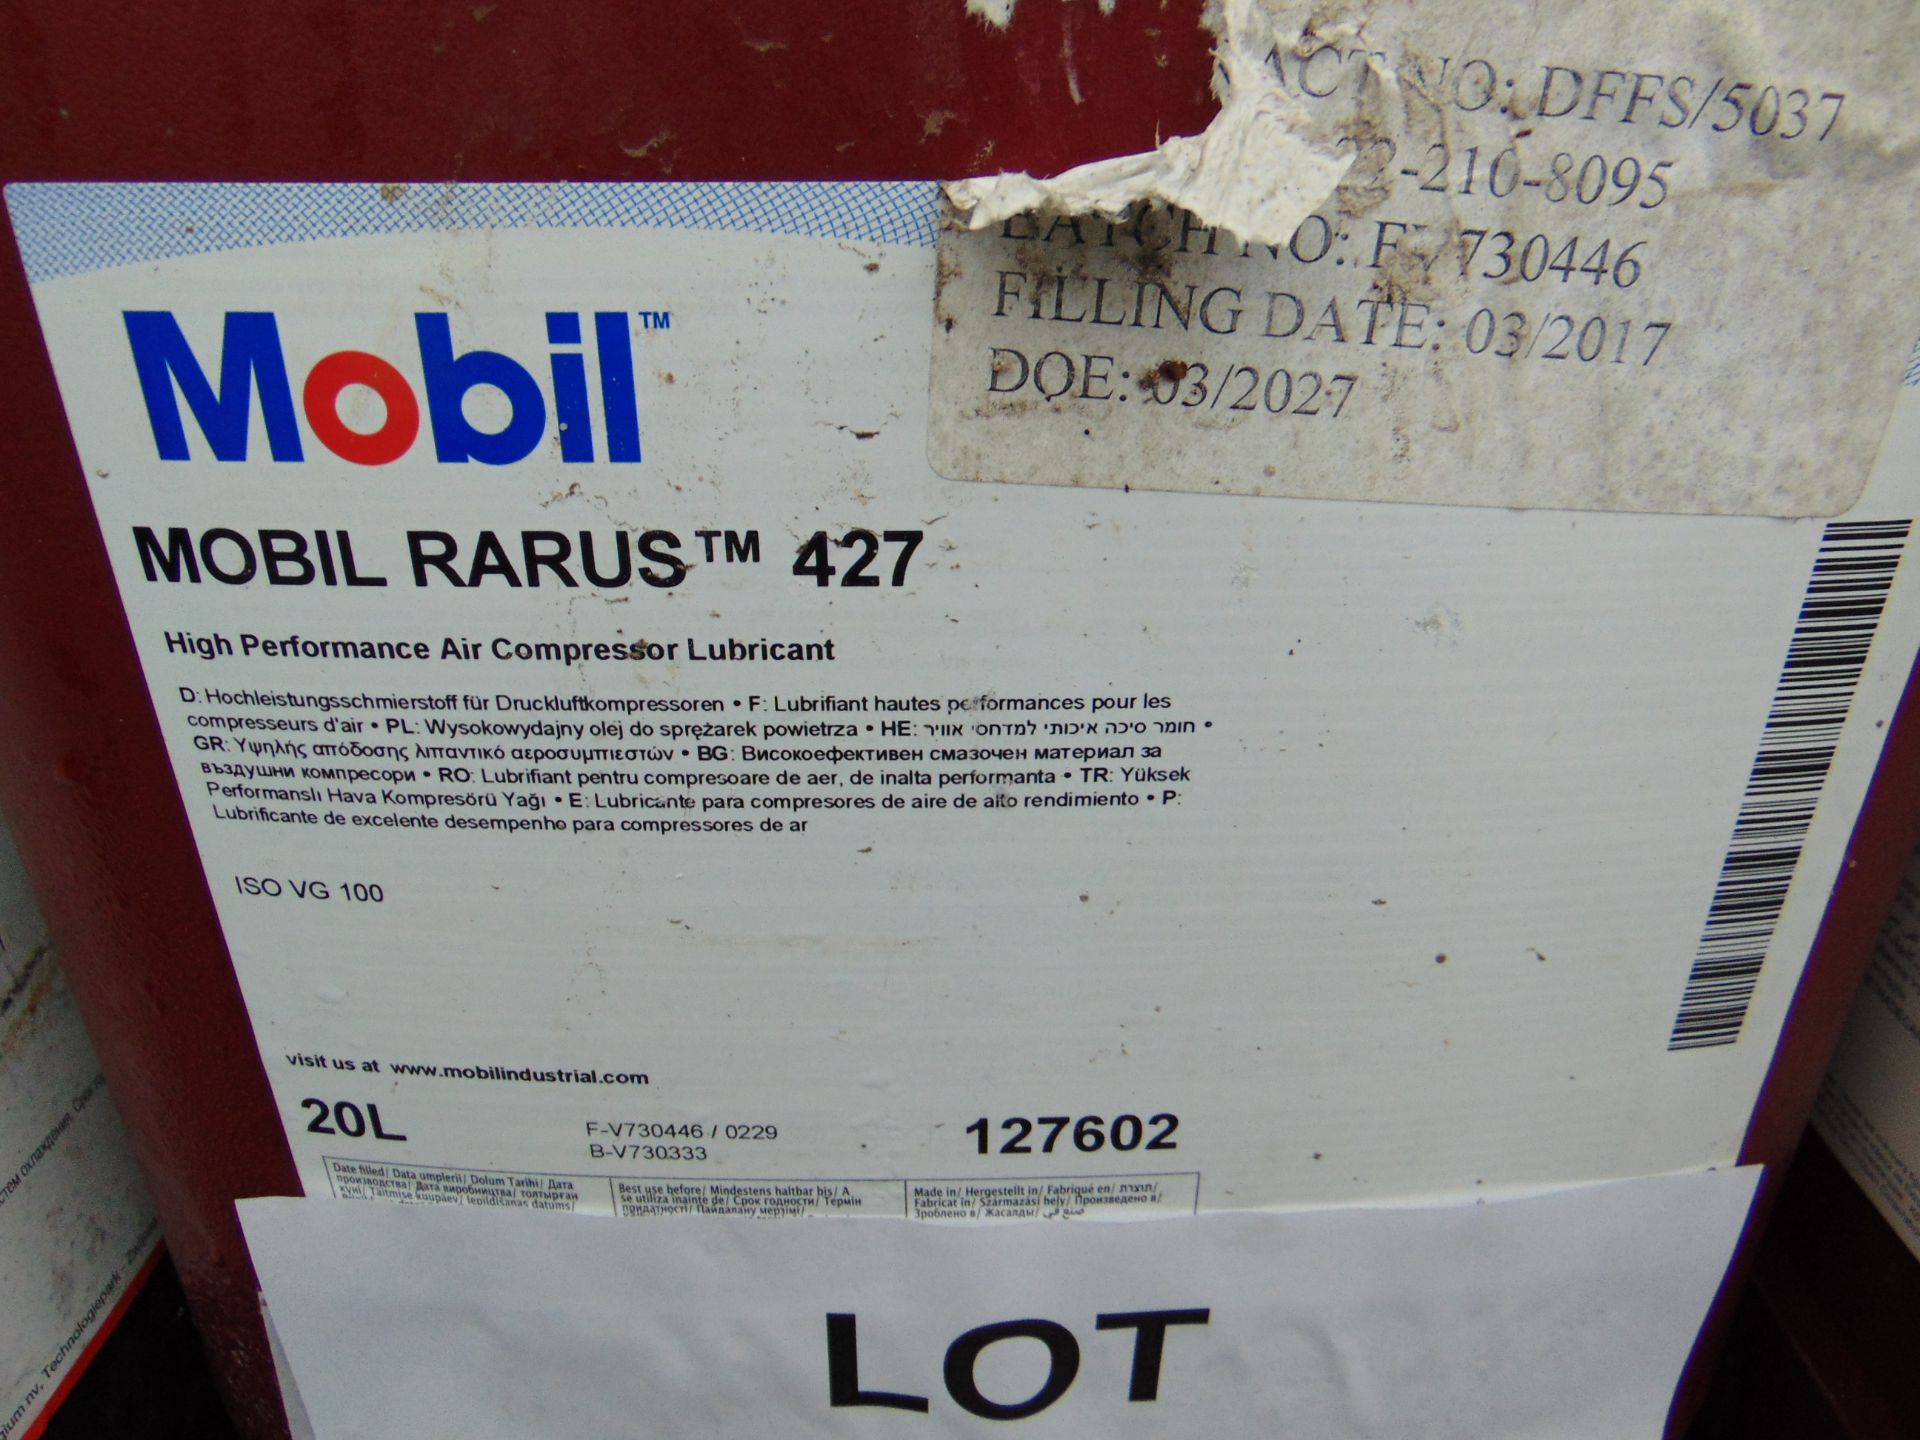 6 x Unissued 20L Sealed Drums of Mobil Rarus 427 High Performance Oil Compressor Lubricant - Image 2 of 2